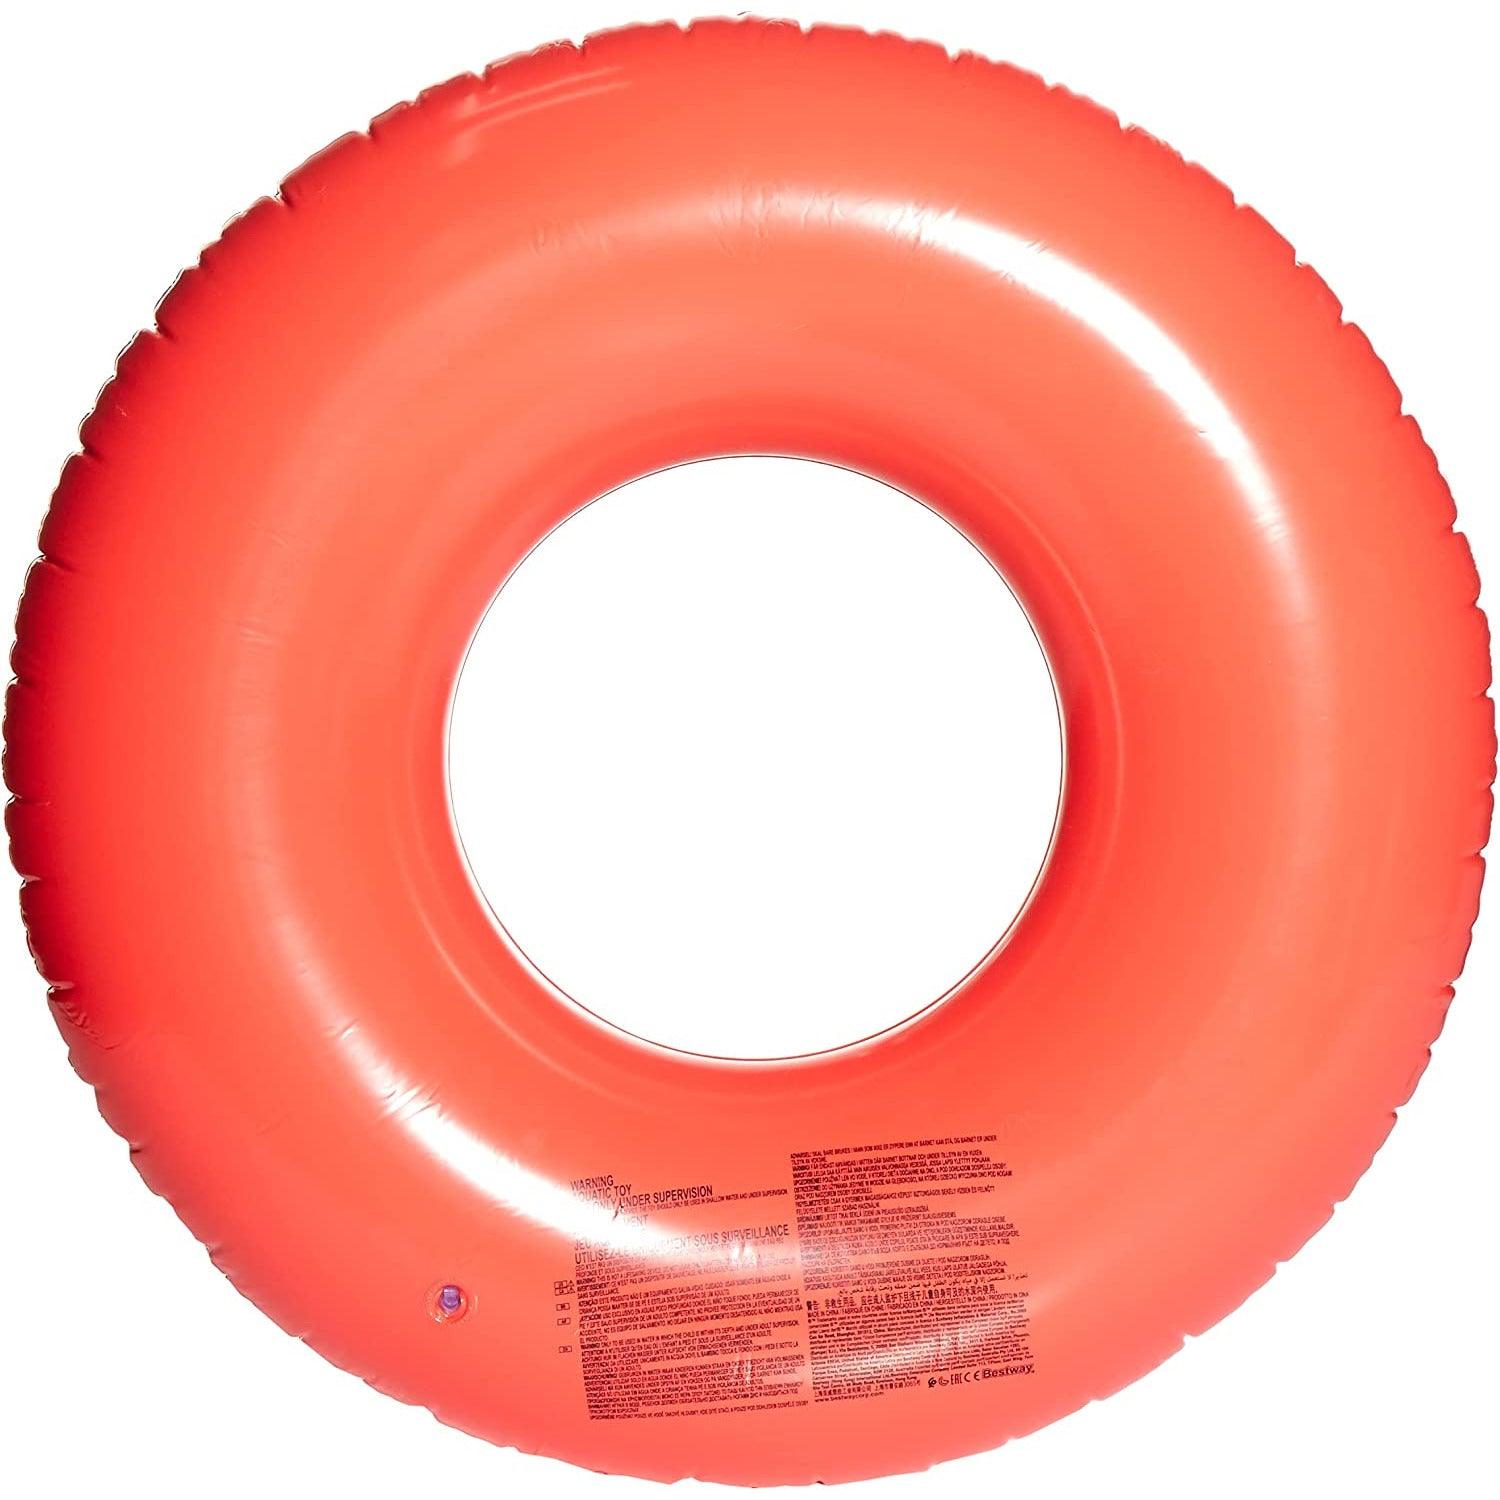 Bestway 36231 Scentsational Raspberry Inflatable Swim Ring Tube 119Cm - BumbleToys - 8-13 Years, Boys, Eagle Plus, Floaters, Island, Sand Toys Pools & Inflatables